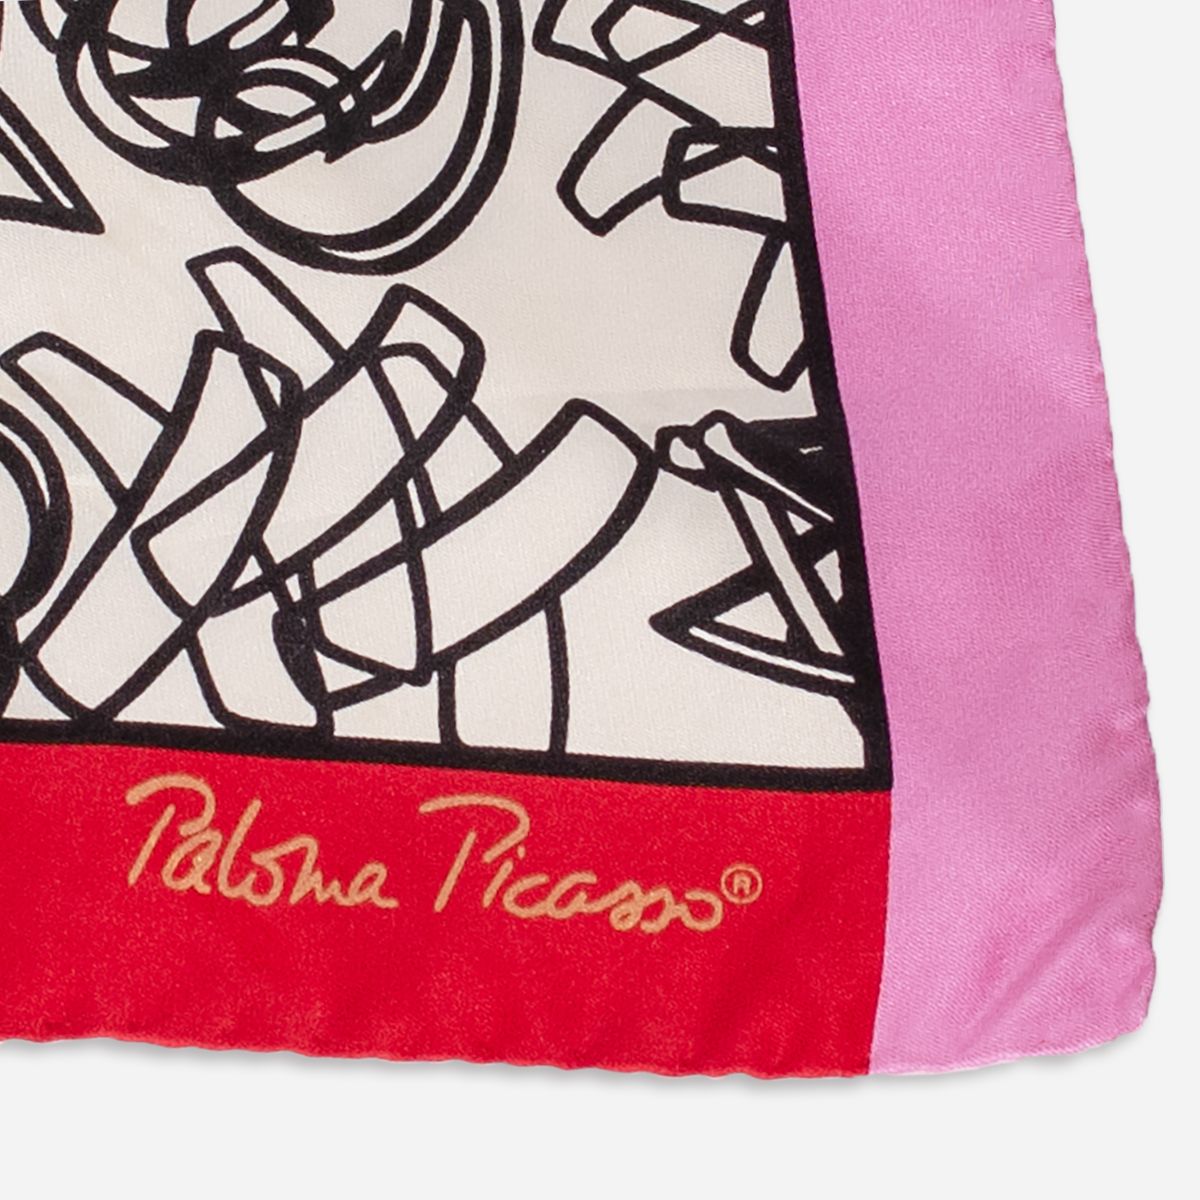 Paloma Picasso signed silk scarf